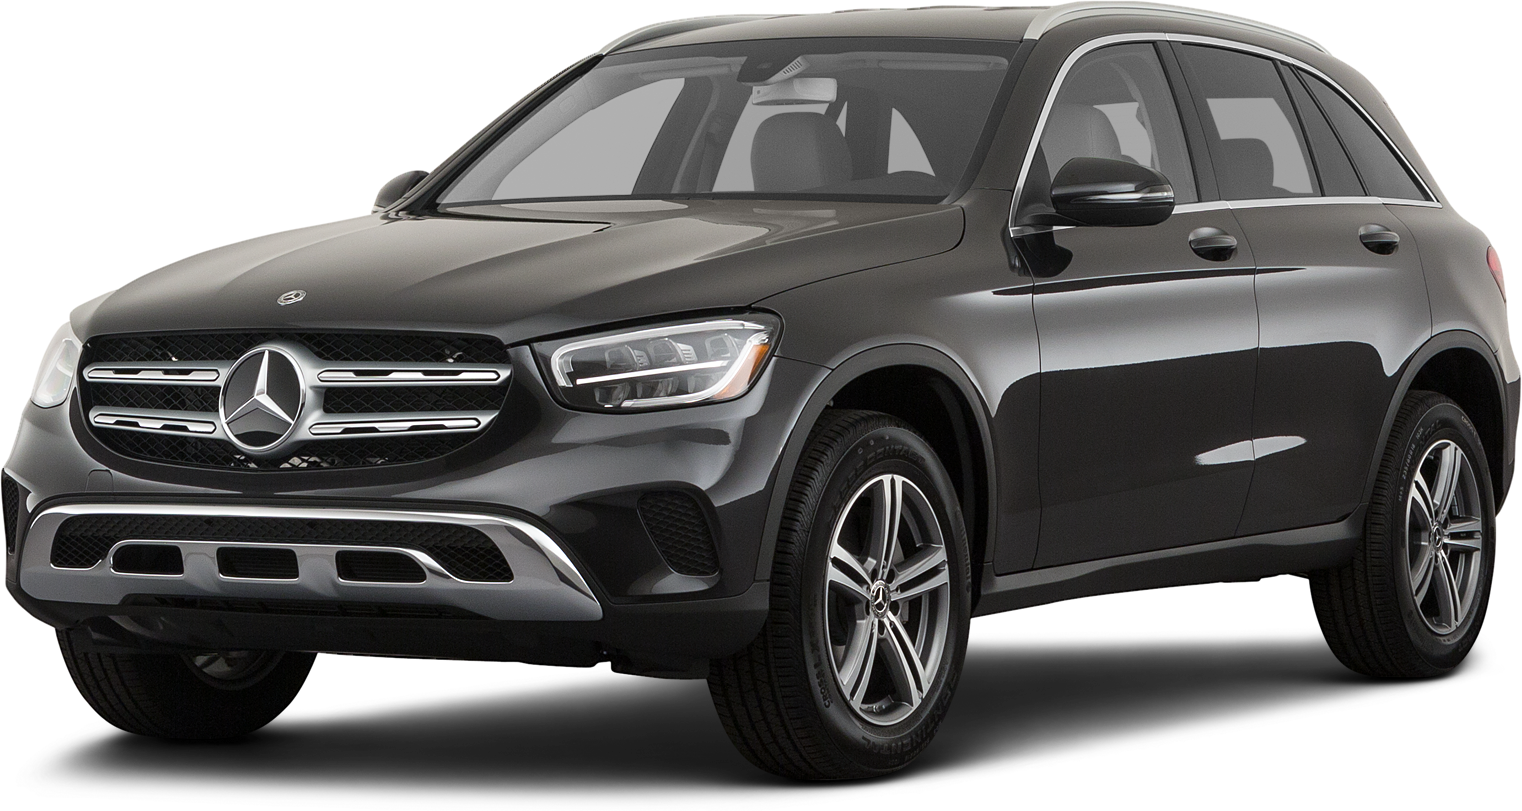 2020-mercedes-benz-glc-300-incentives-offers-in-roanoke-bedford